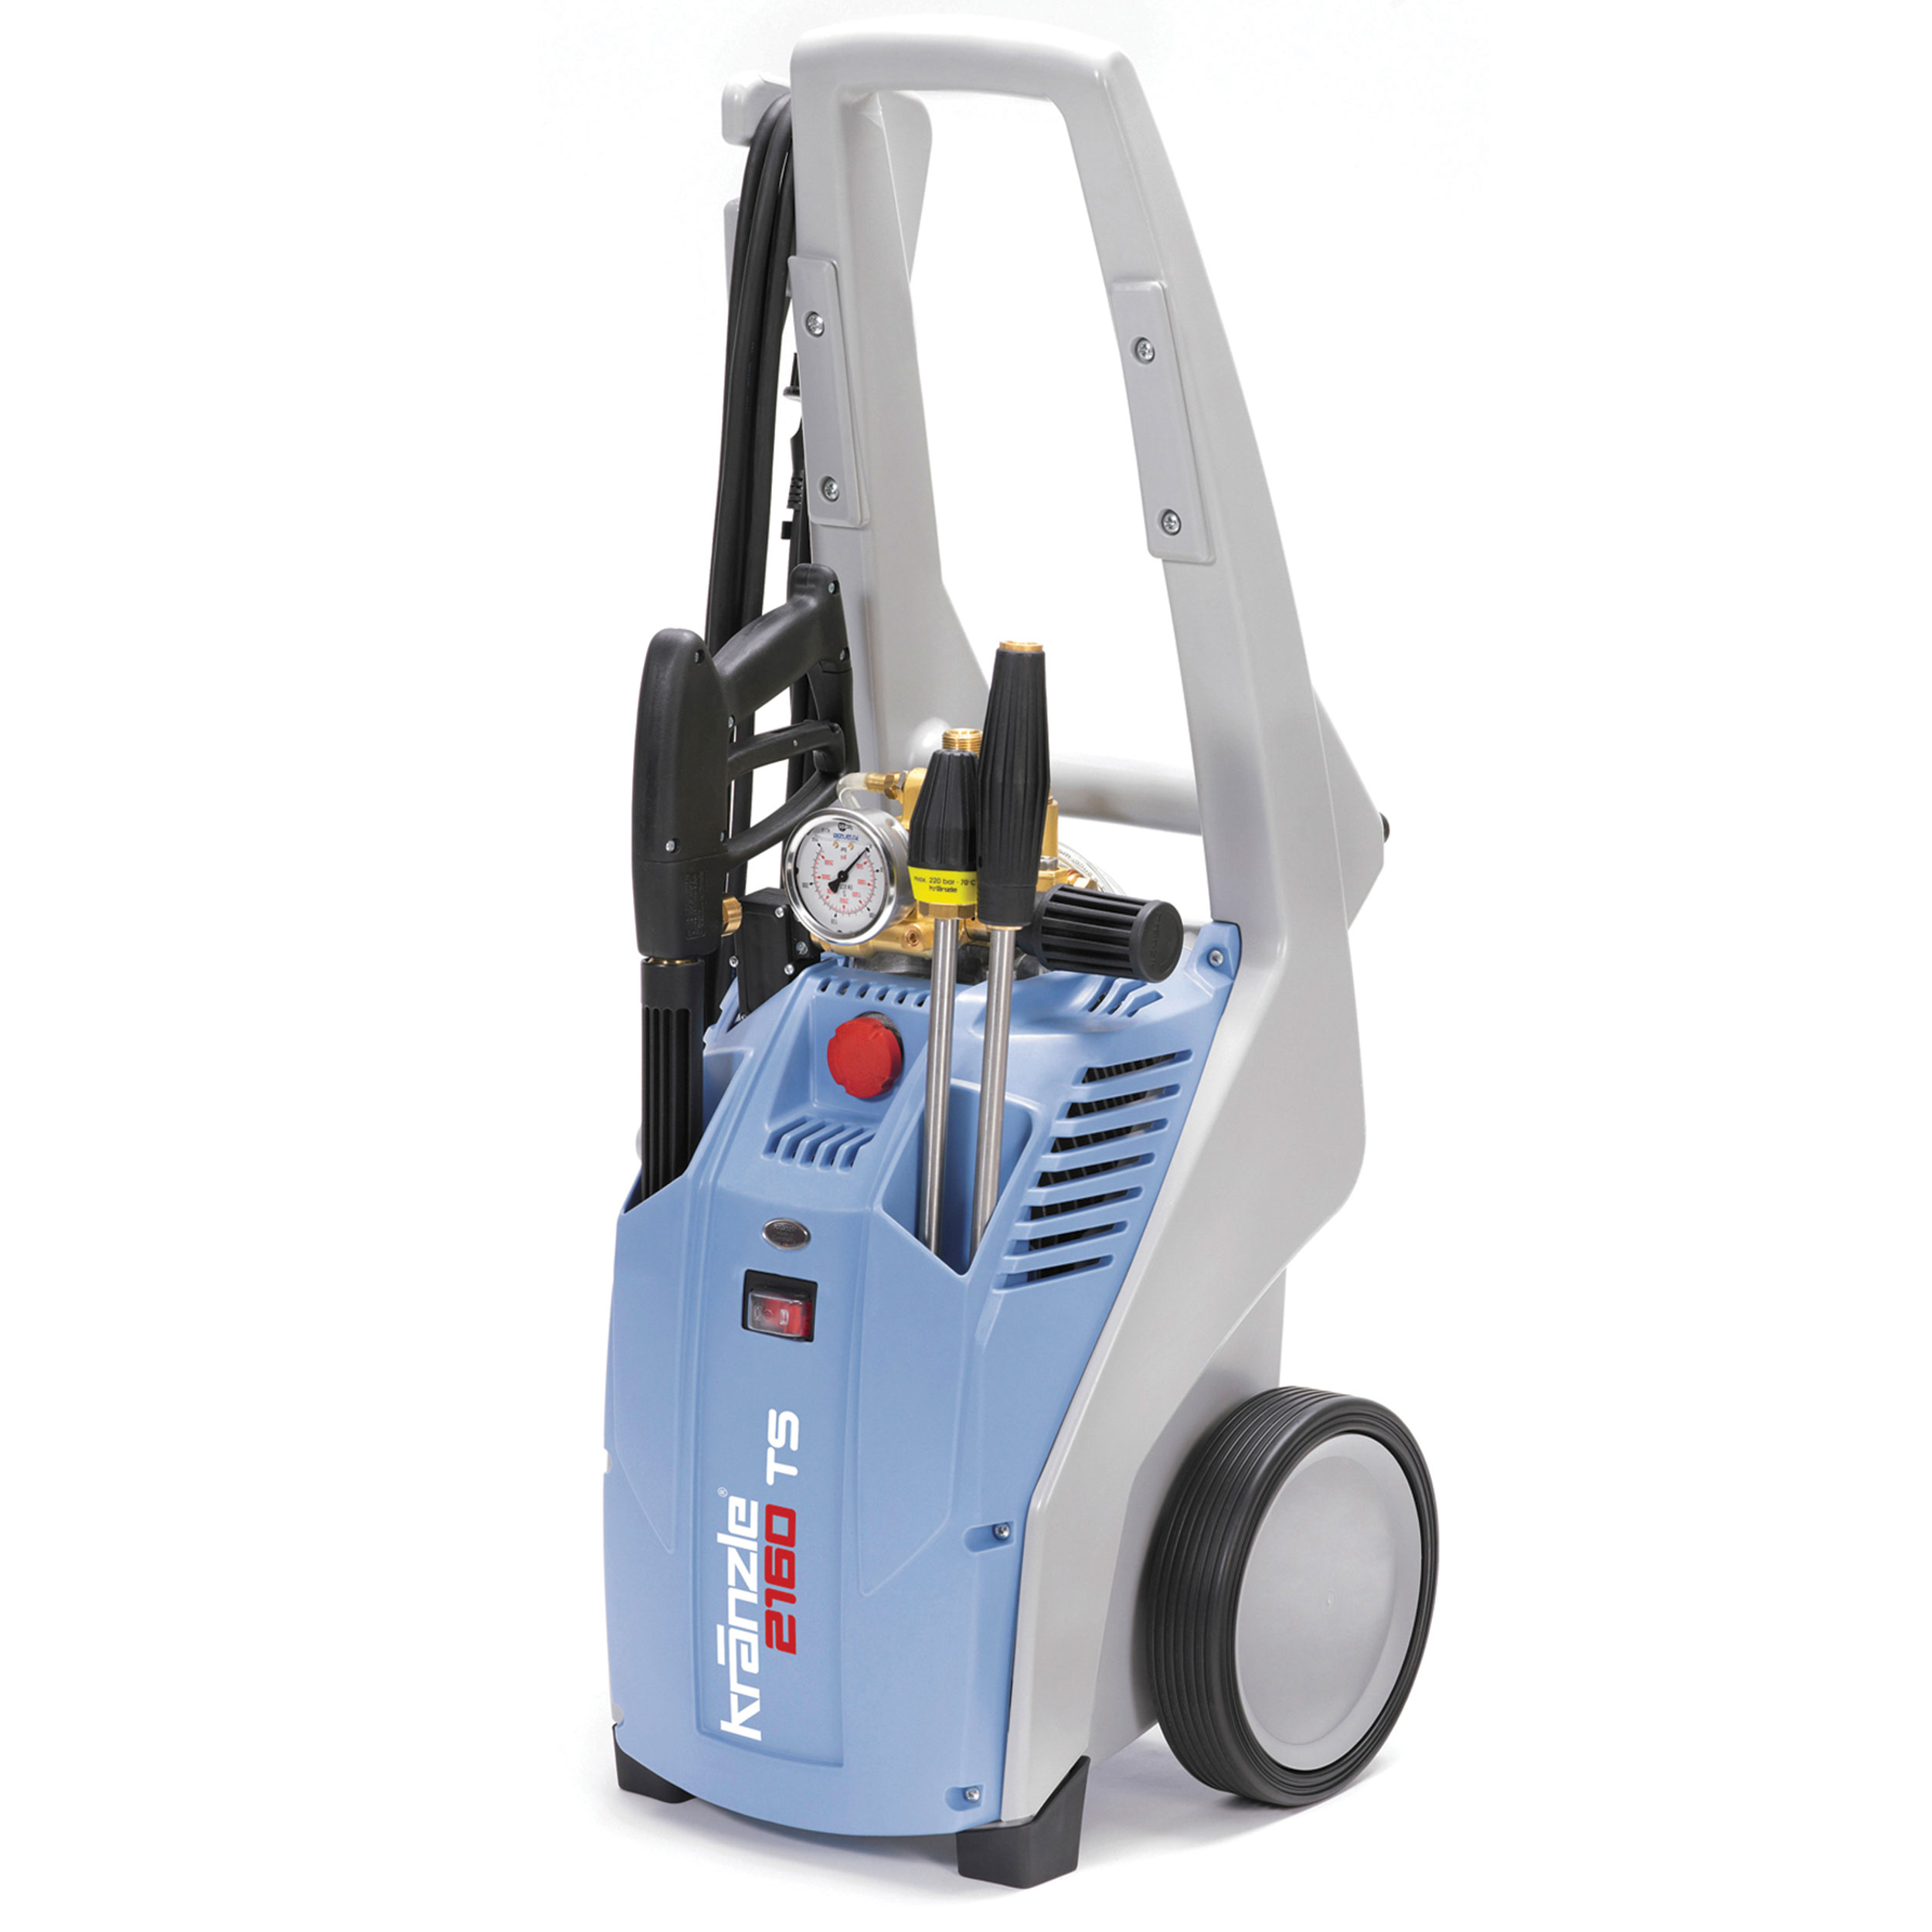 K2020t Pressure Washer, Cold Water, 110v, 20a, Gfi